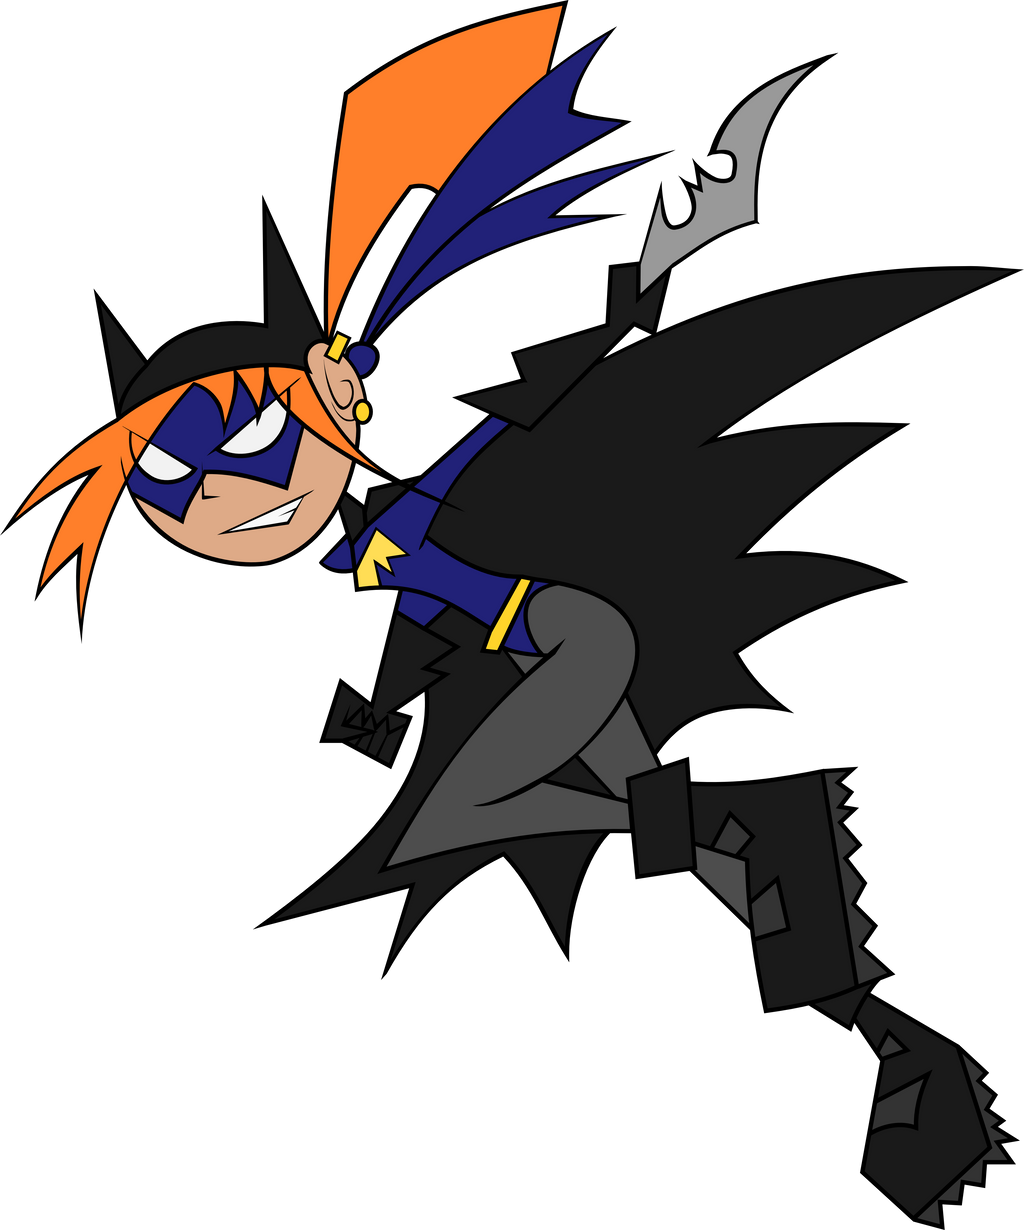 Batgirl Vector drawing by wis13 on DeviantArt